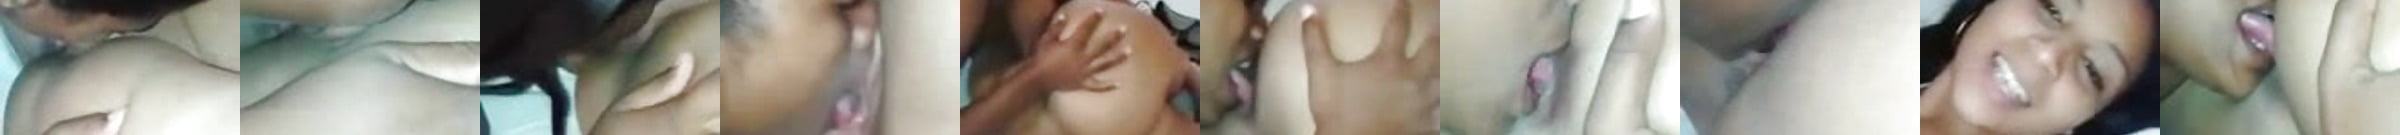 Dominican Lesbian Action Free Lesbian Alohatube Porn Video